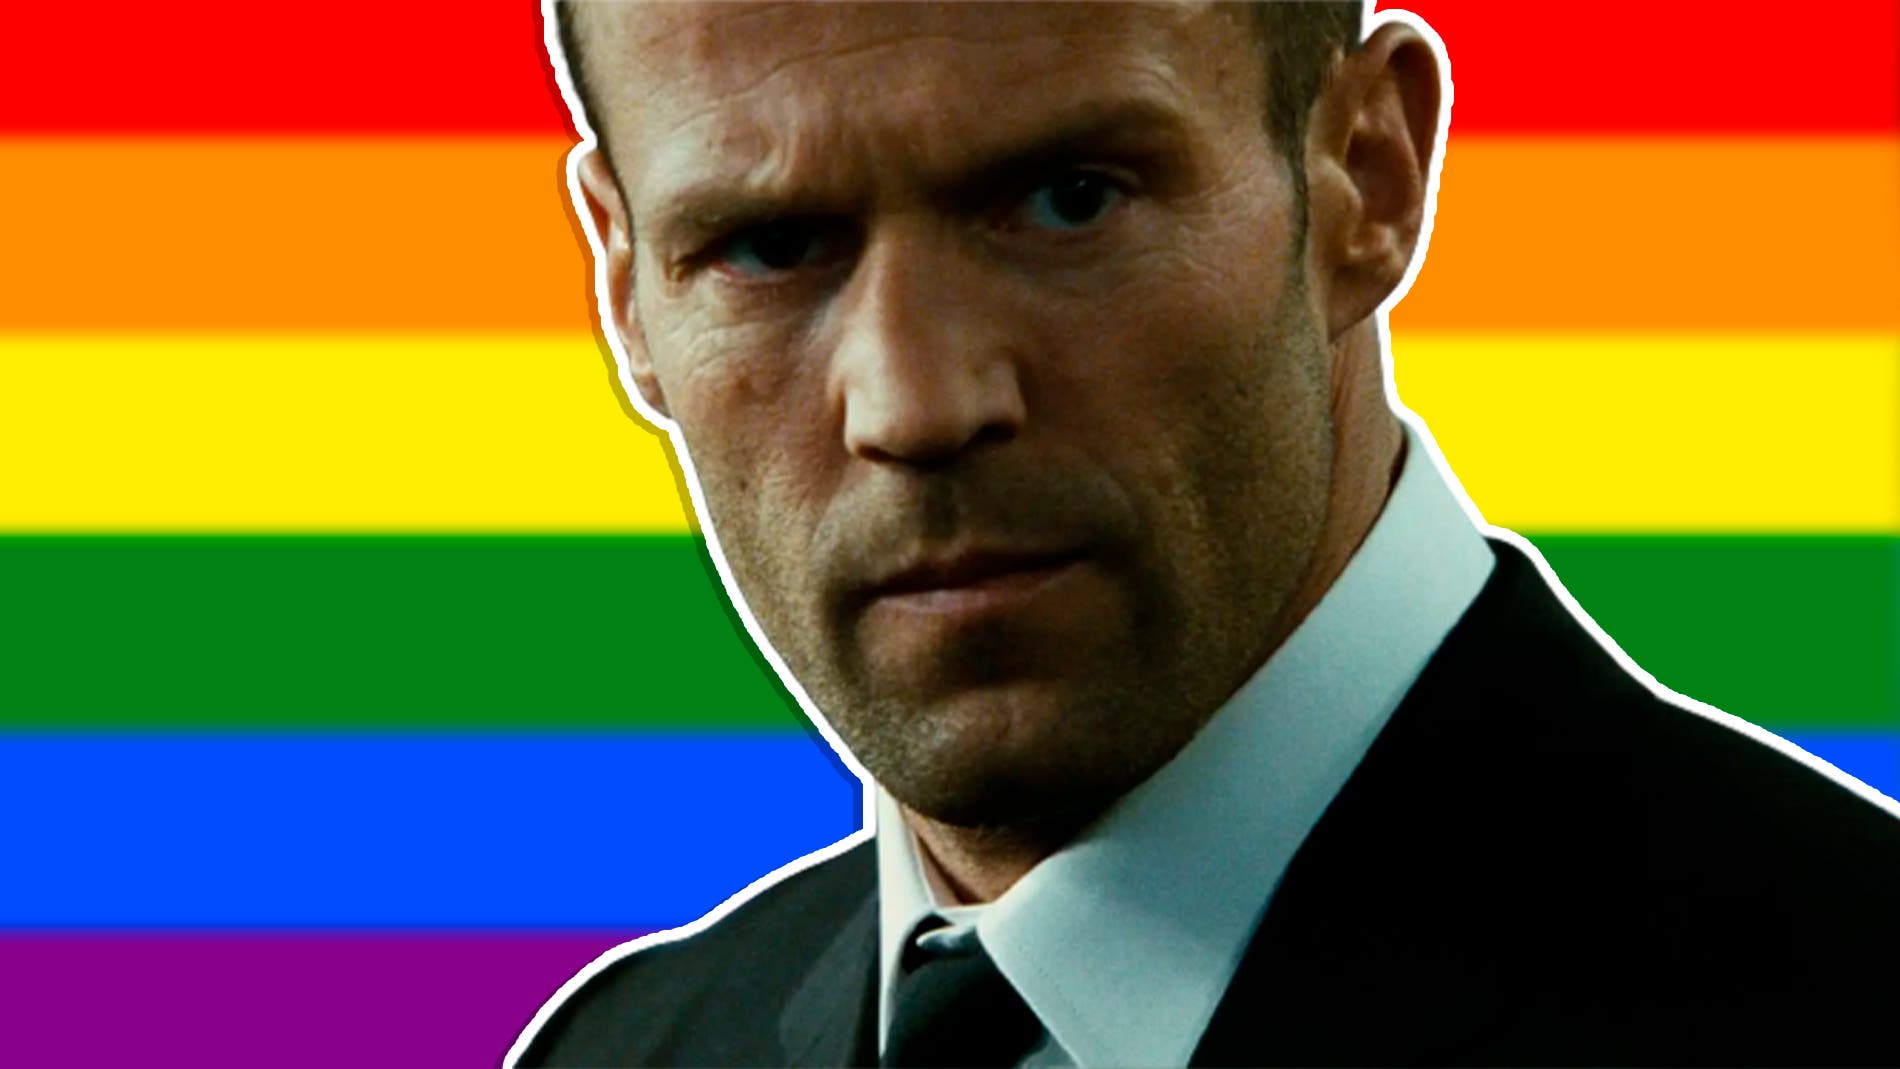 He was gay and you didn’t realize it: Jason Statham’s character in Transporter was a revolution